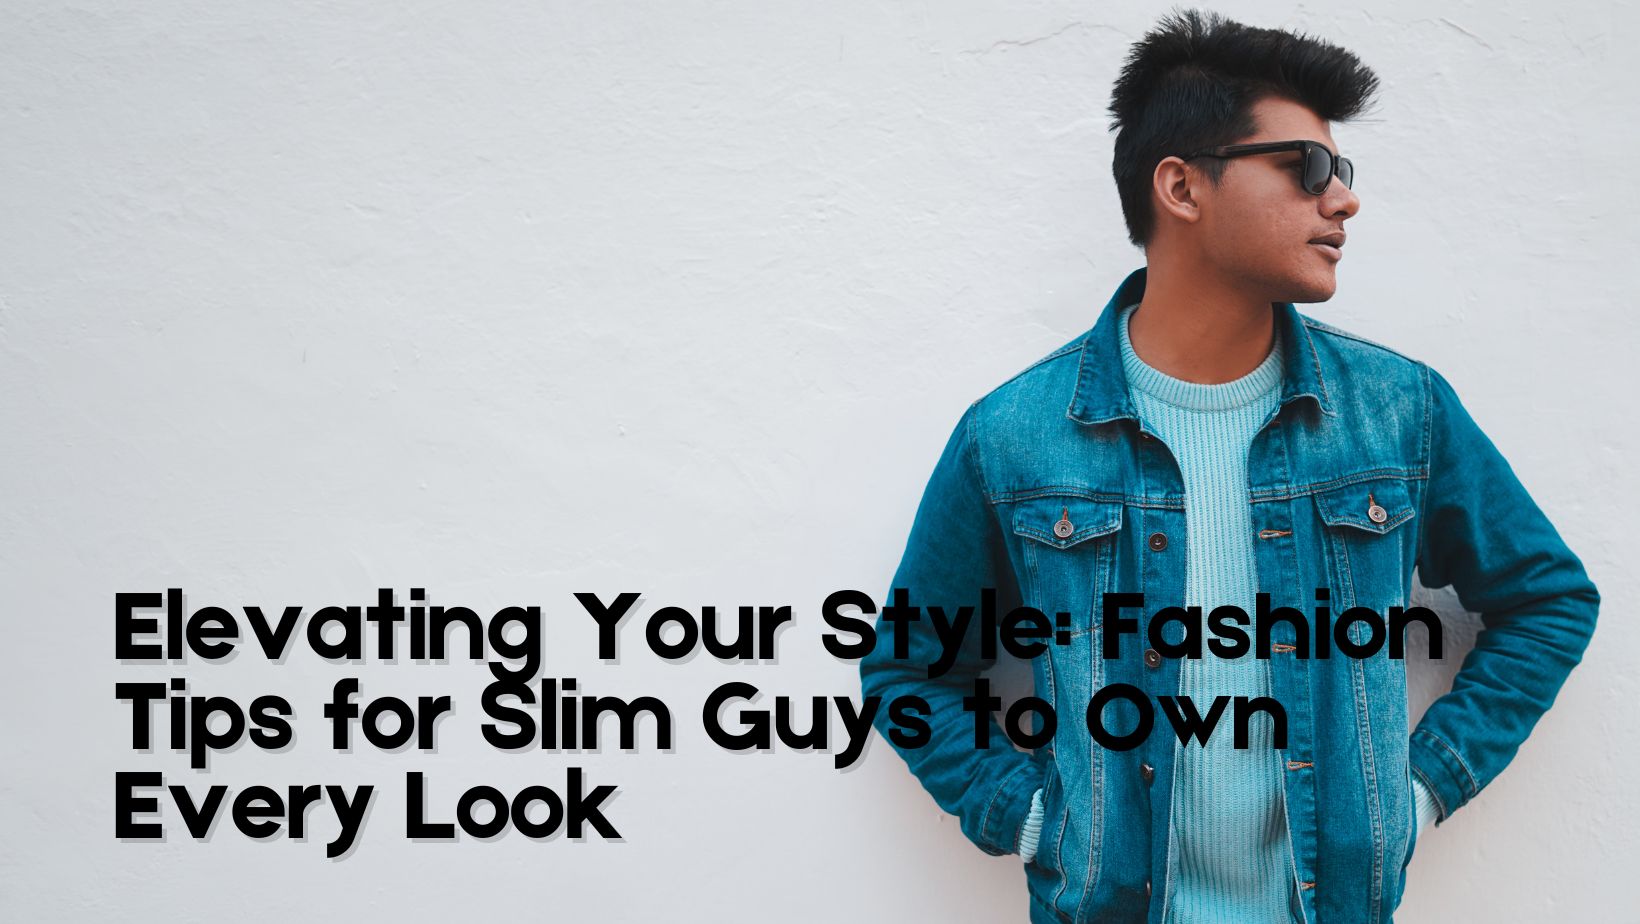 Elevating Your Style: Fashion Tips for Slim Guys to Own Every Look